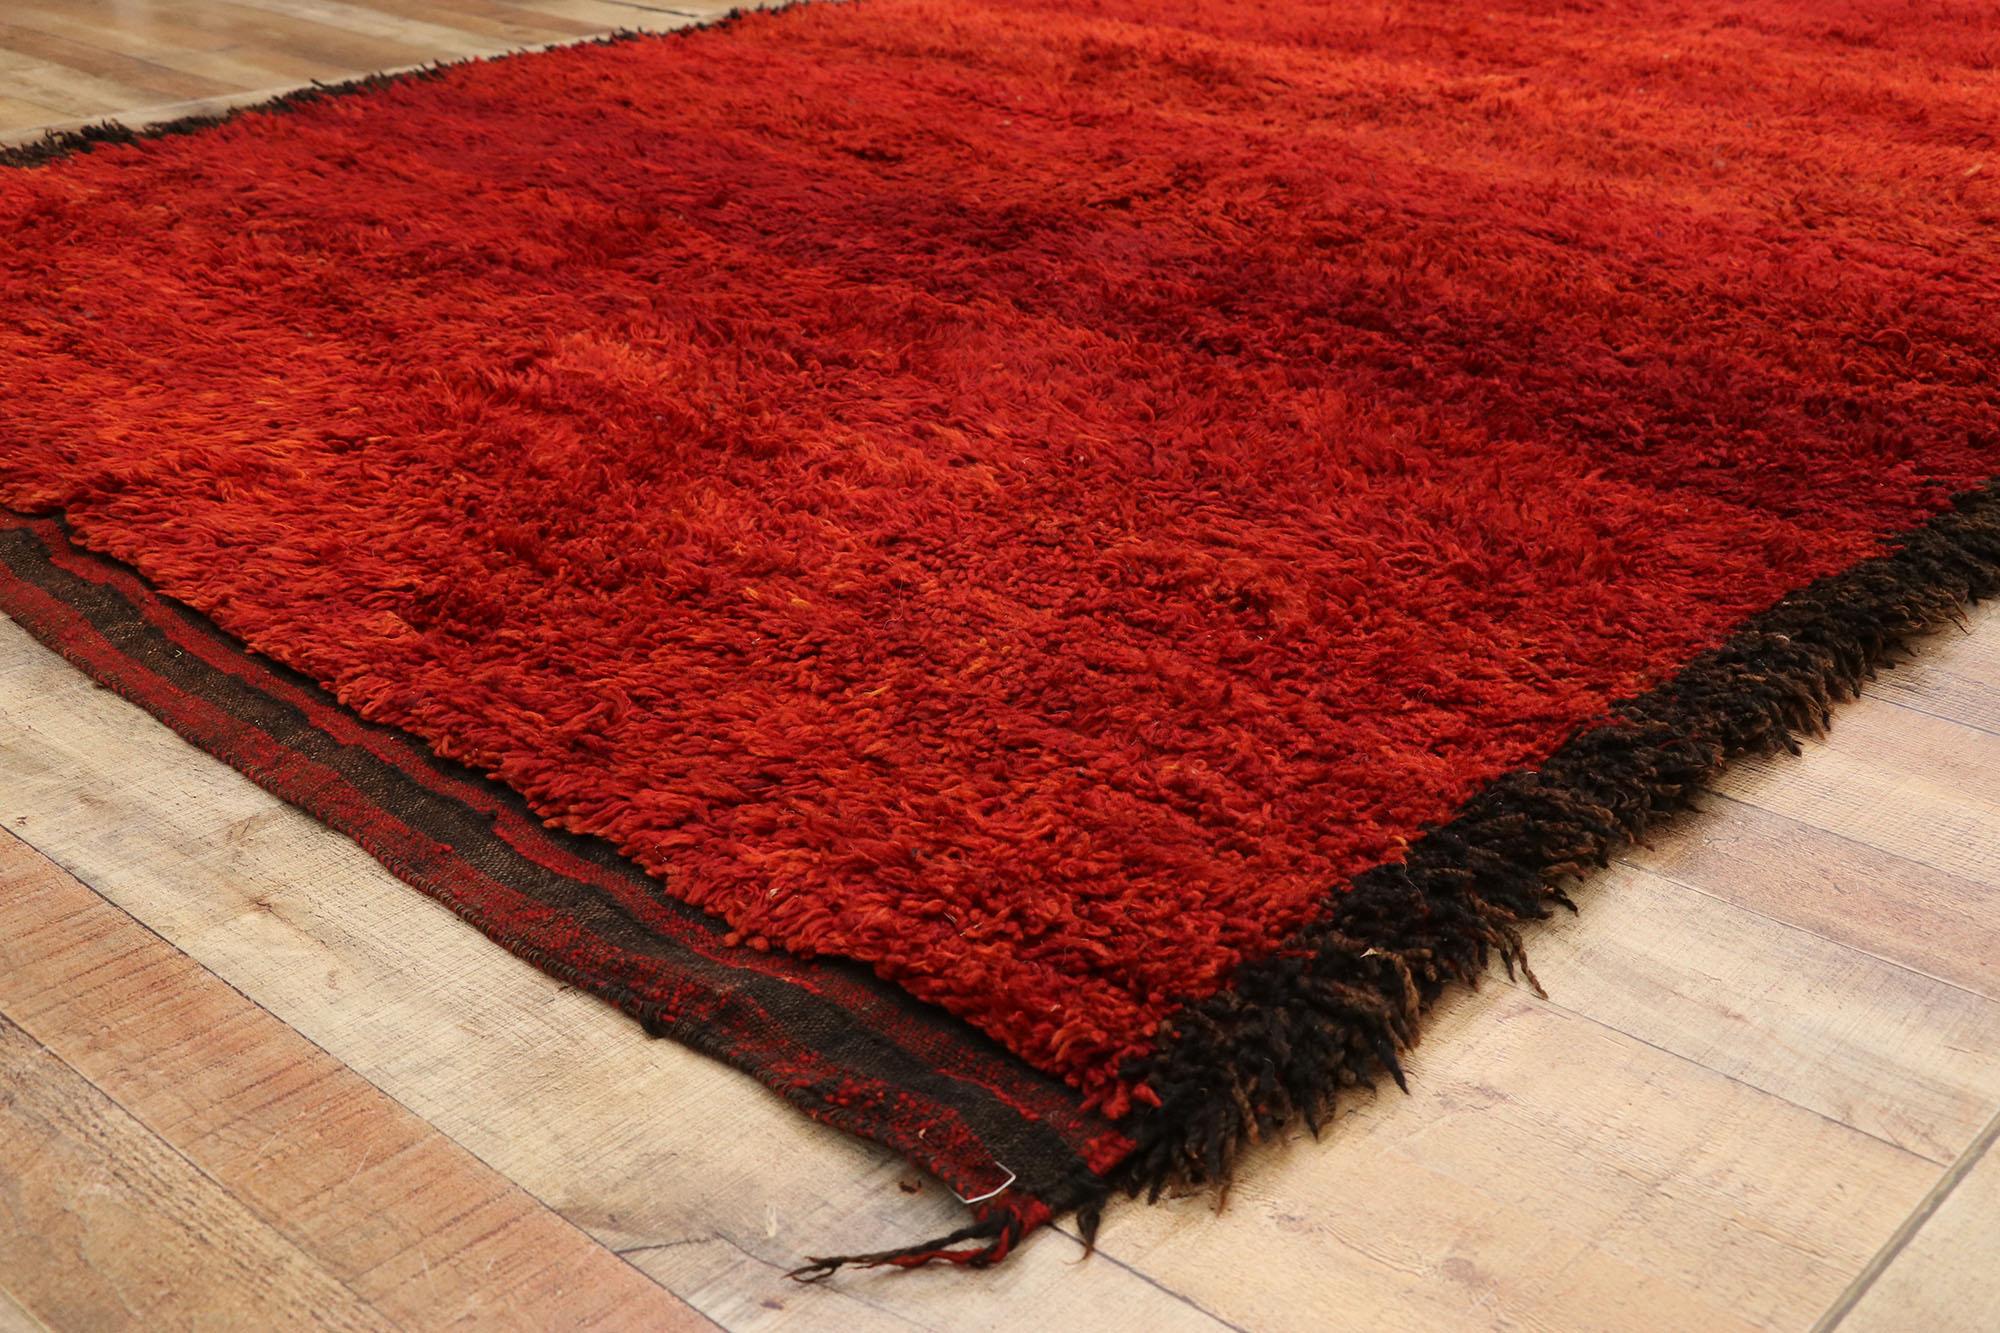 20th Century Vintage Red Moroccan Rug, Berber Shag Rug with Retro Modern Style For Sale